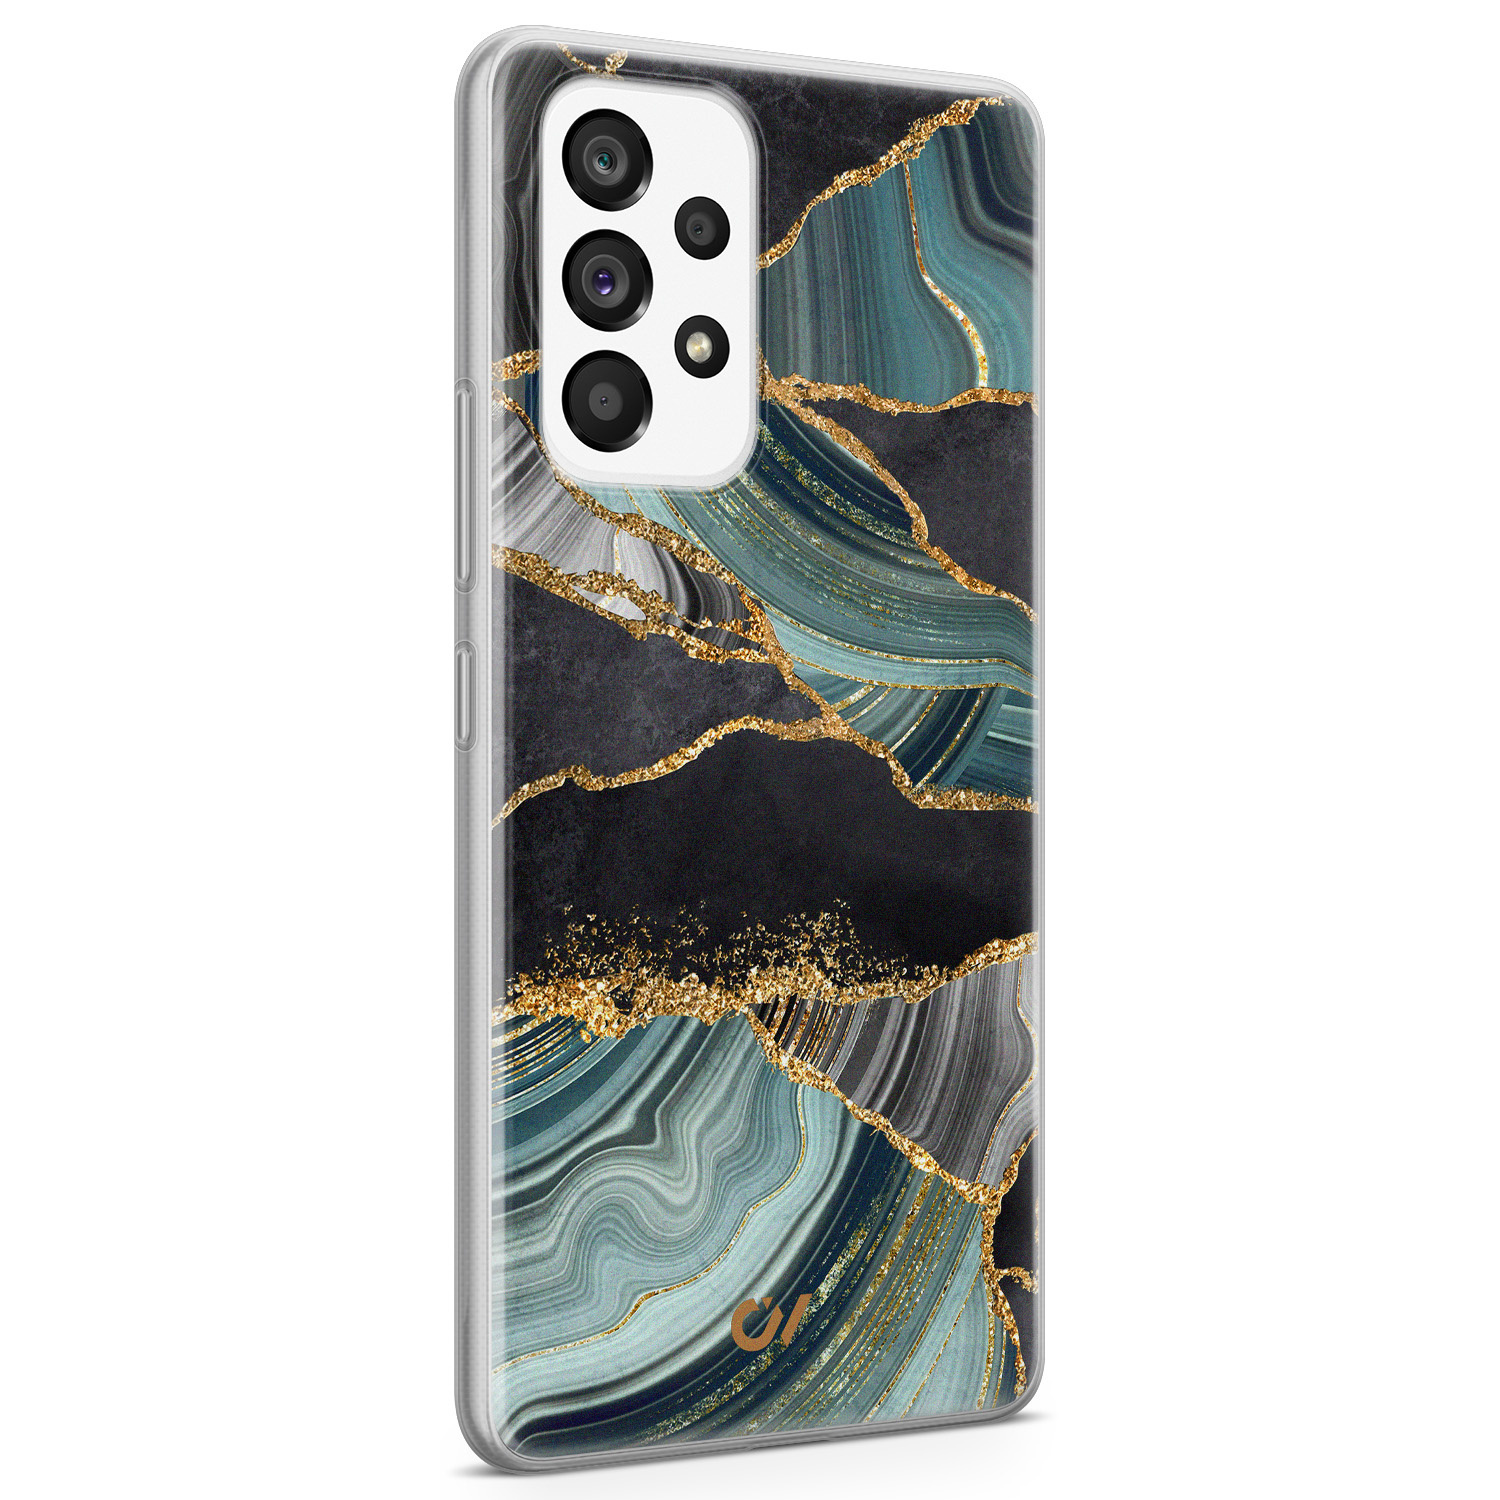 Casevibes Samsung Galaxy A33 hoesje siliconen - Marble Jade Stone